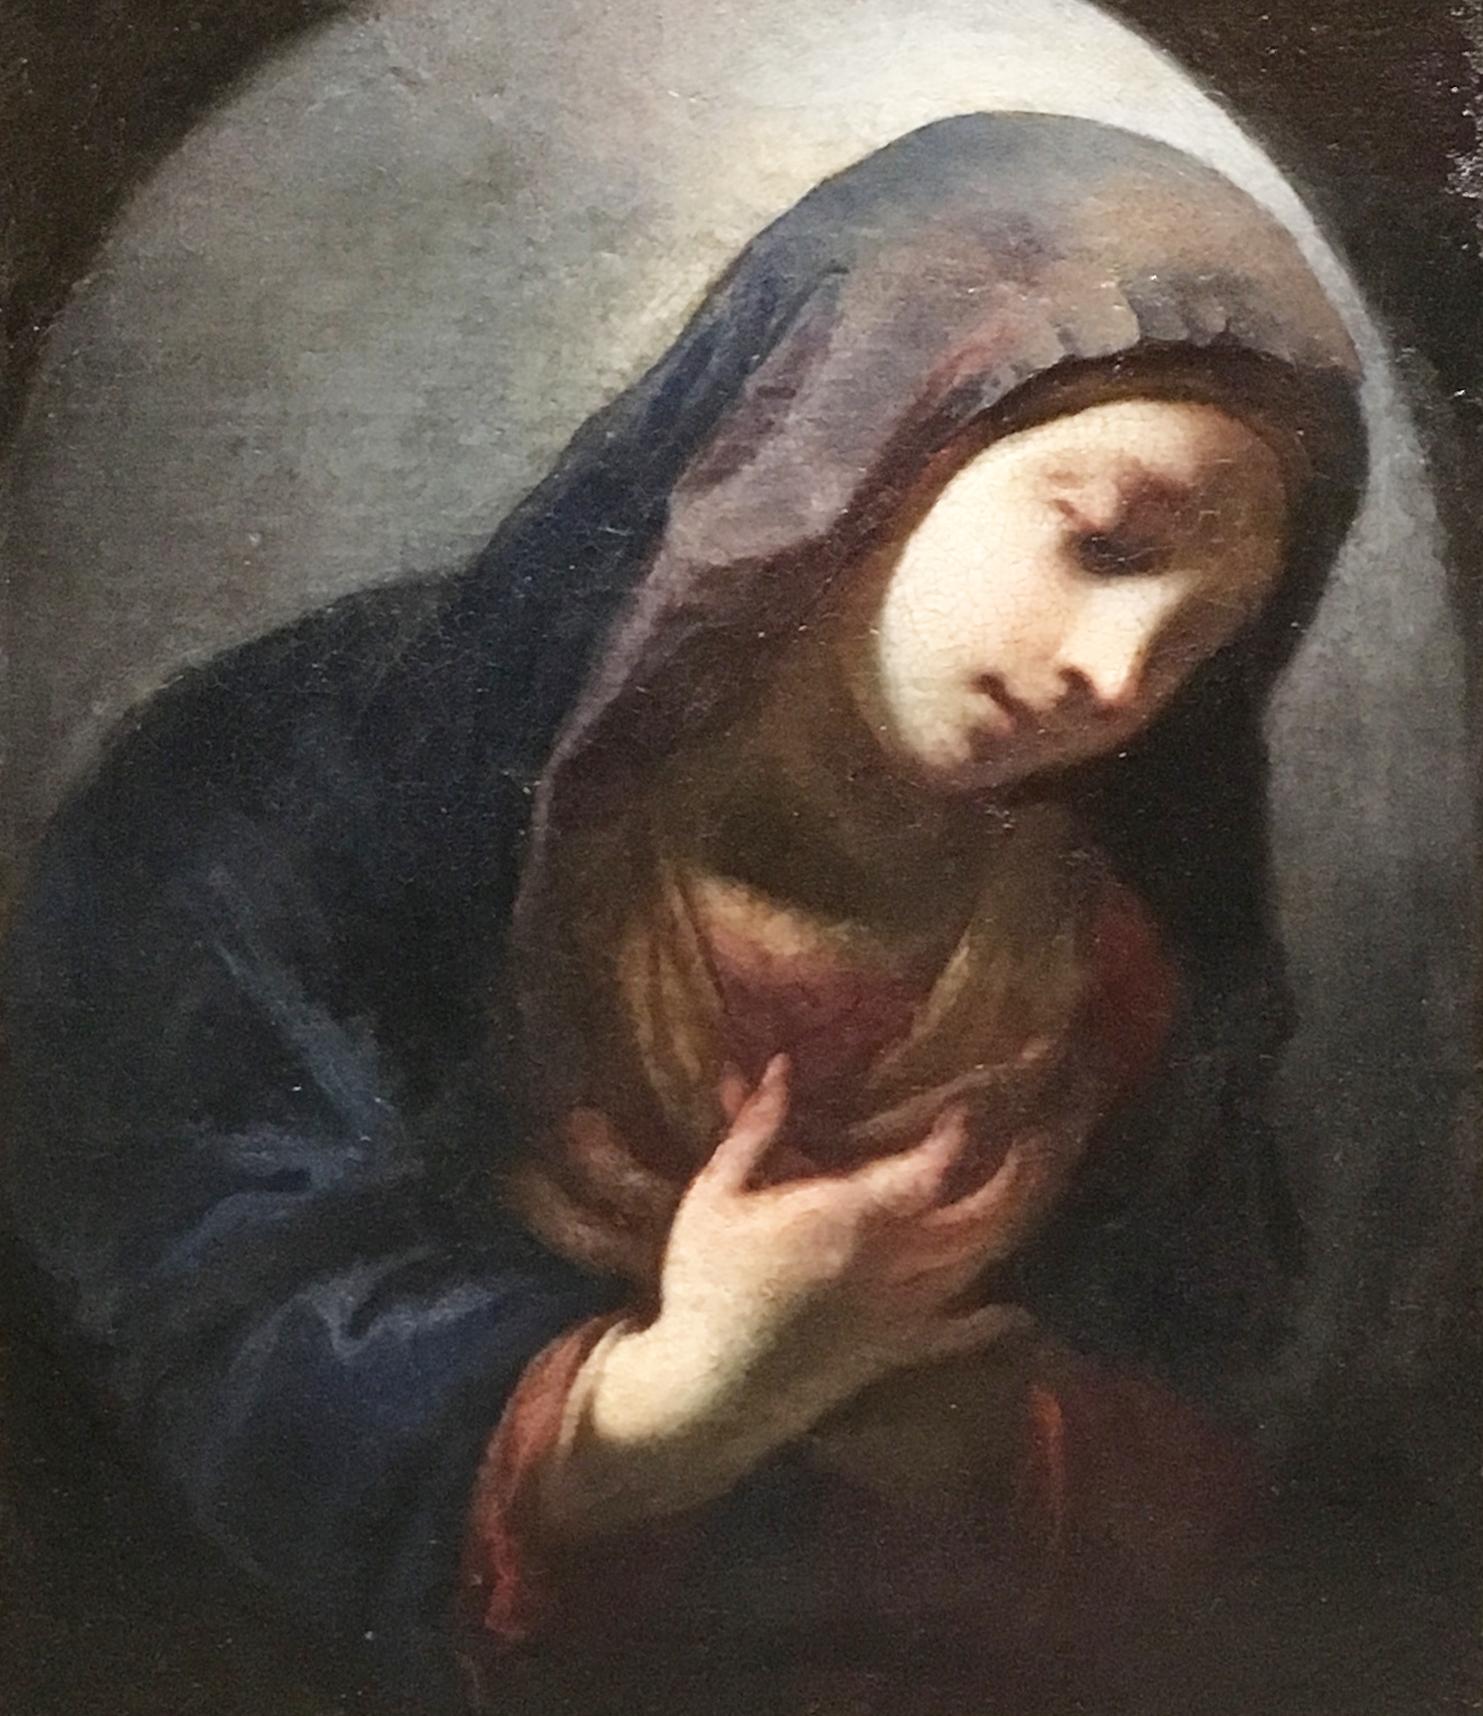 Oil on canvas painting depicting a Madonna
By unknown artist
Tuscany, Italy, early 18th century

Dimensions with frame: 40 x 46 cm 
Dimensions without frame: 33.5 x 38.5 cm.